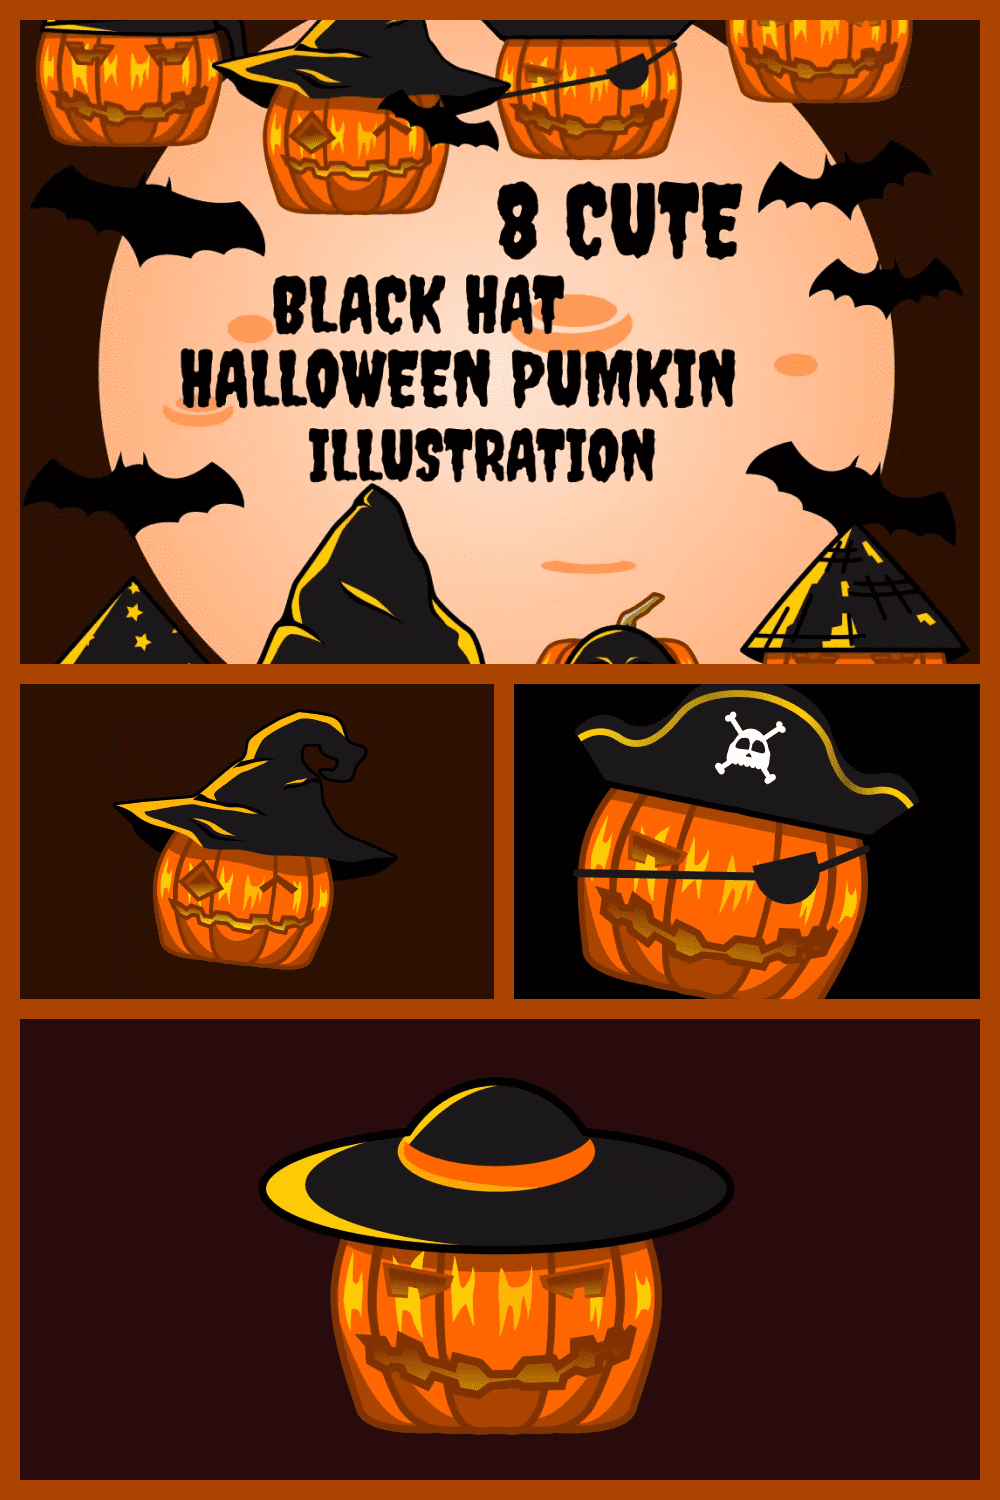 Collage with pumpkins in pirate style.